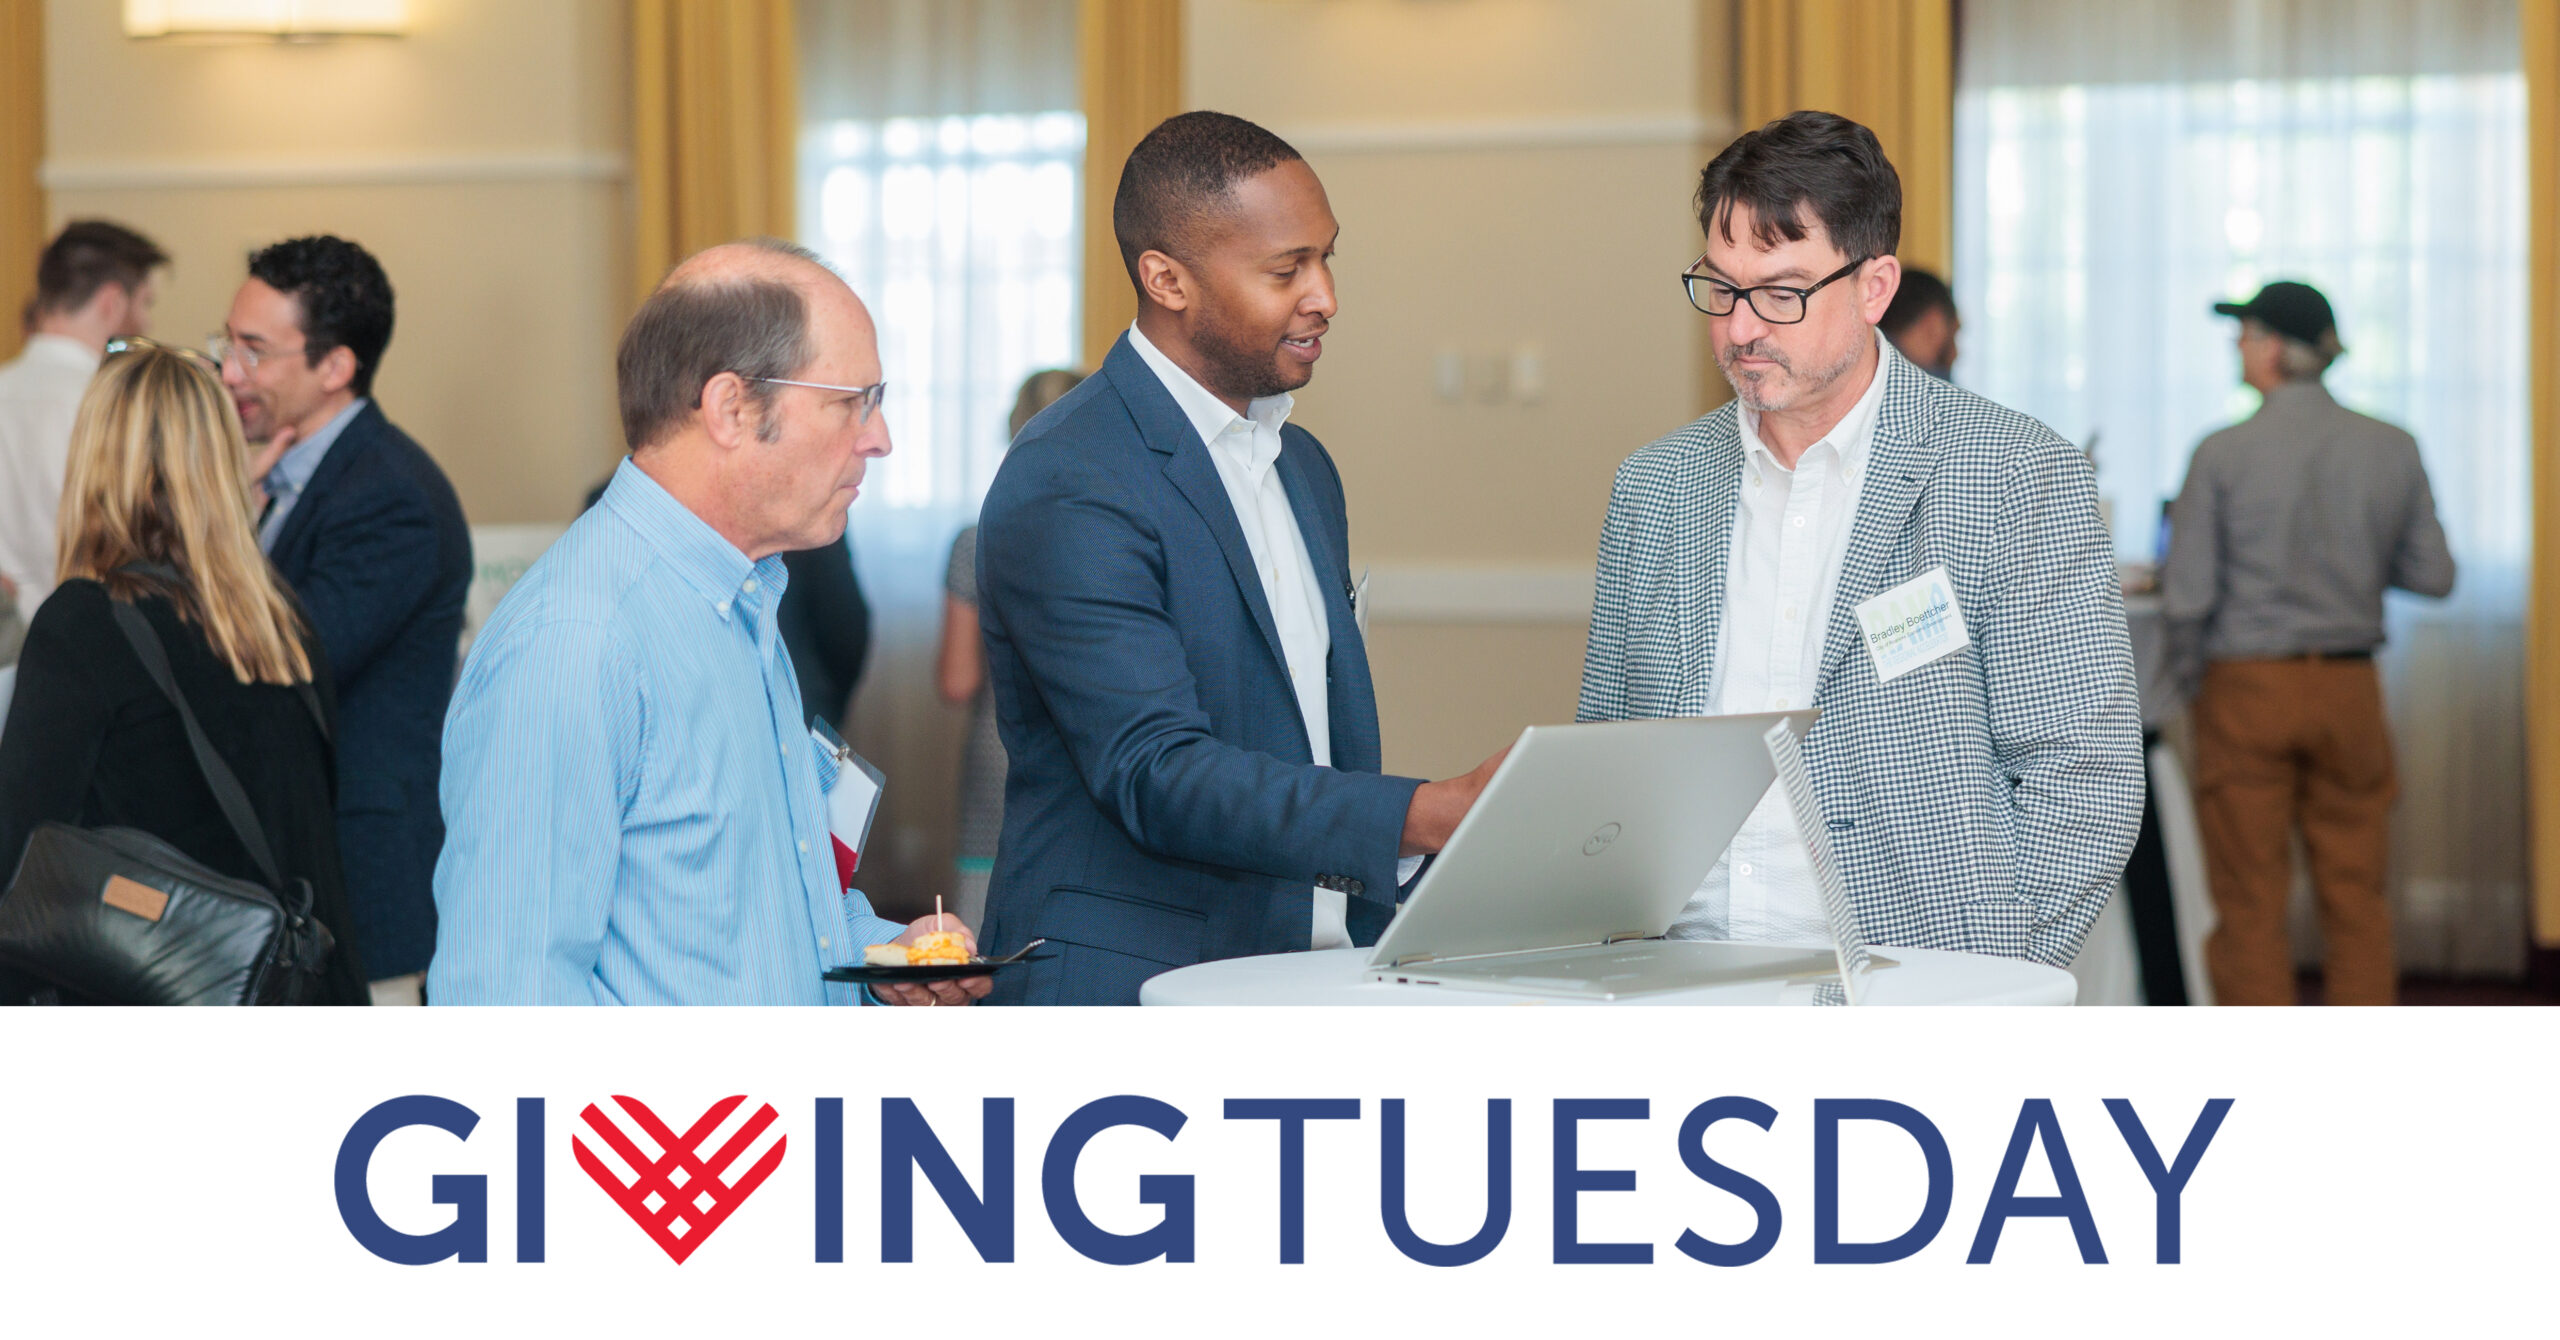 Support Our Innovation Economy on Giving Tuesday